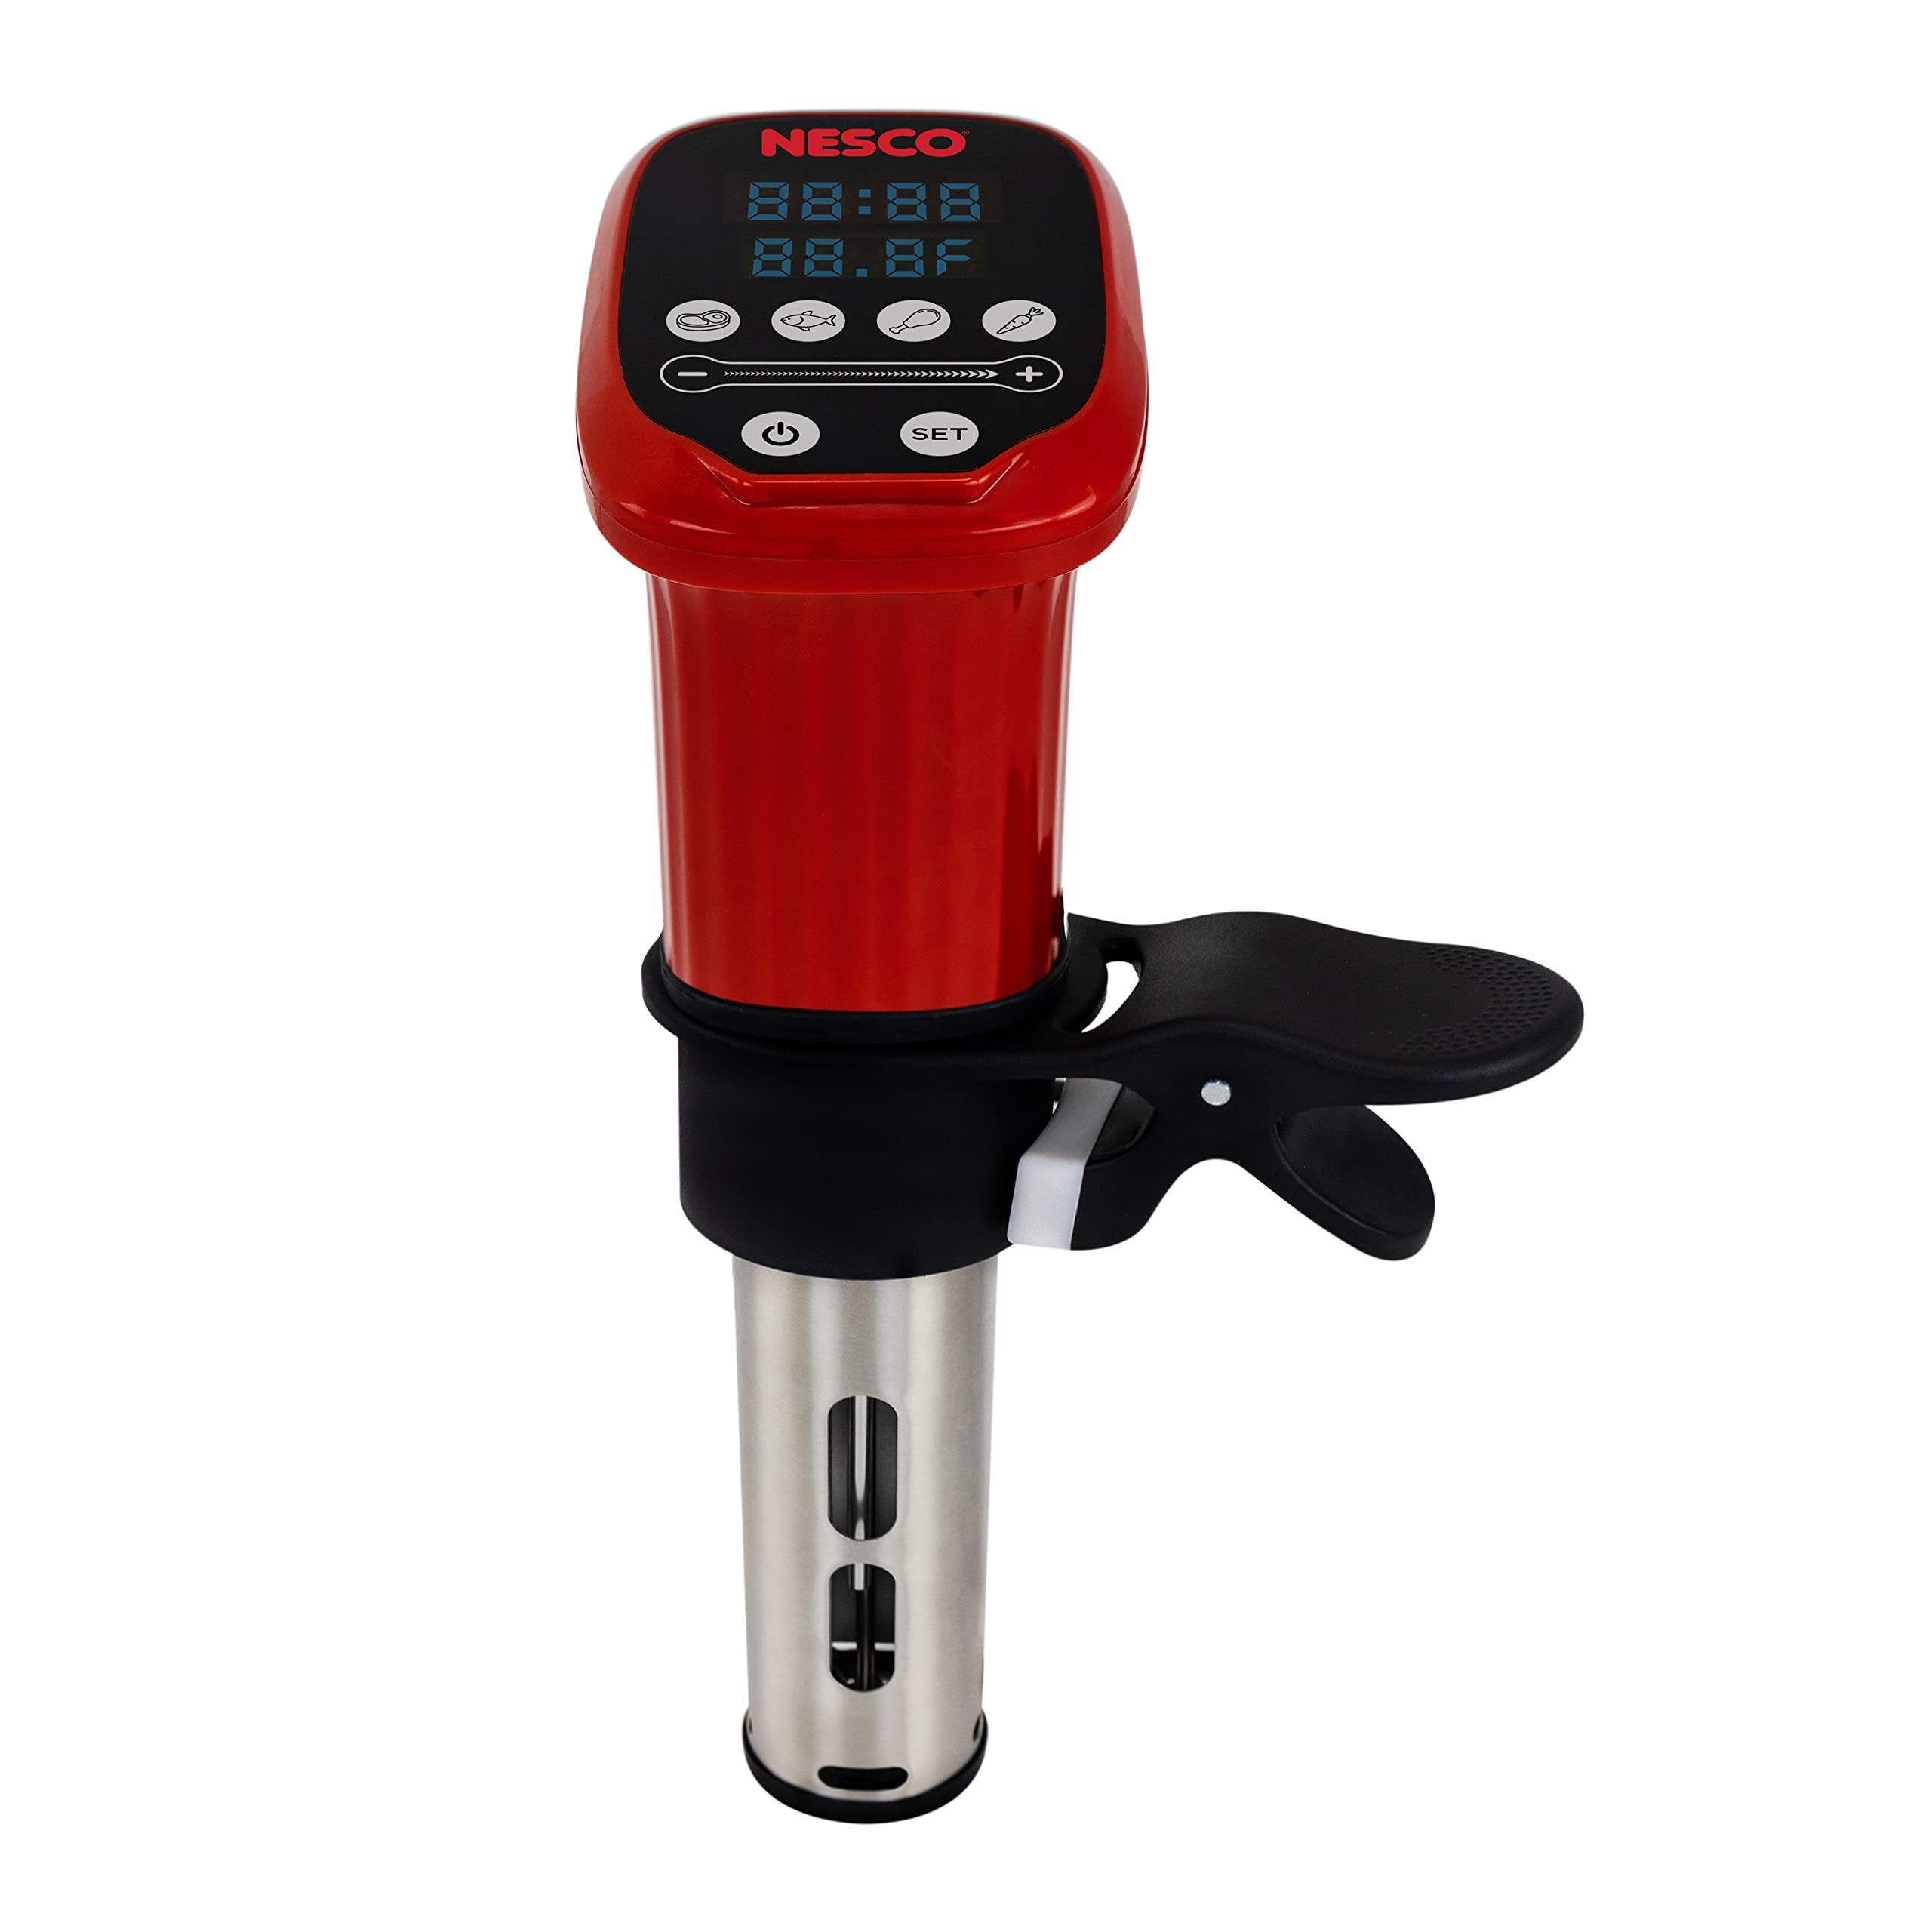 Nesco SVC-1000 Sous Vide Precision Cooker with Digital Display and Pre-Programmed Cooking Options for Meat, Fish, Chicken and Vegetables, 1000 Watts, Red and Black